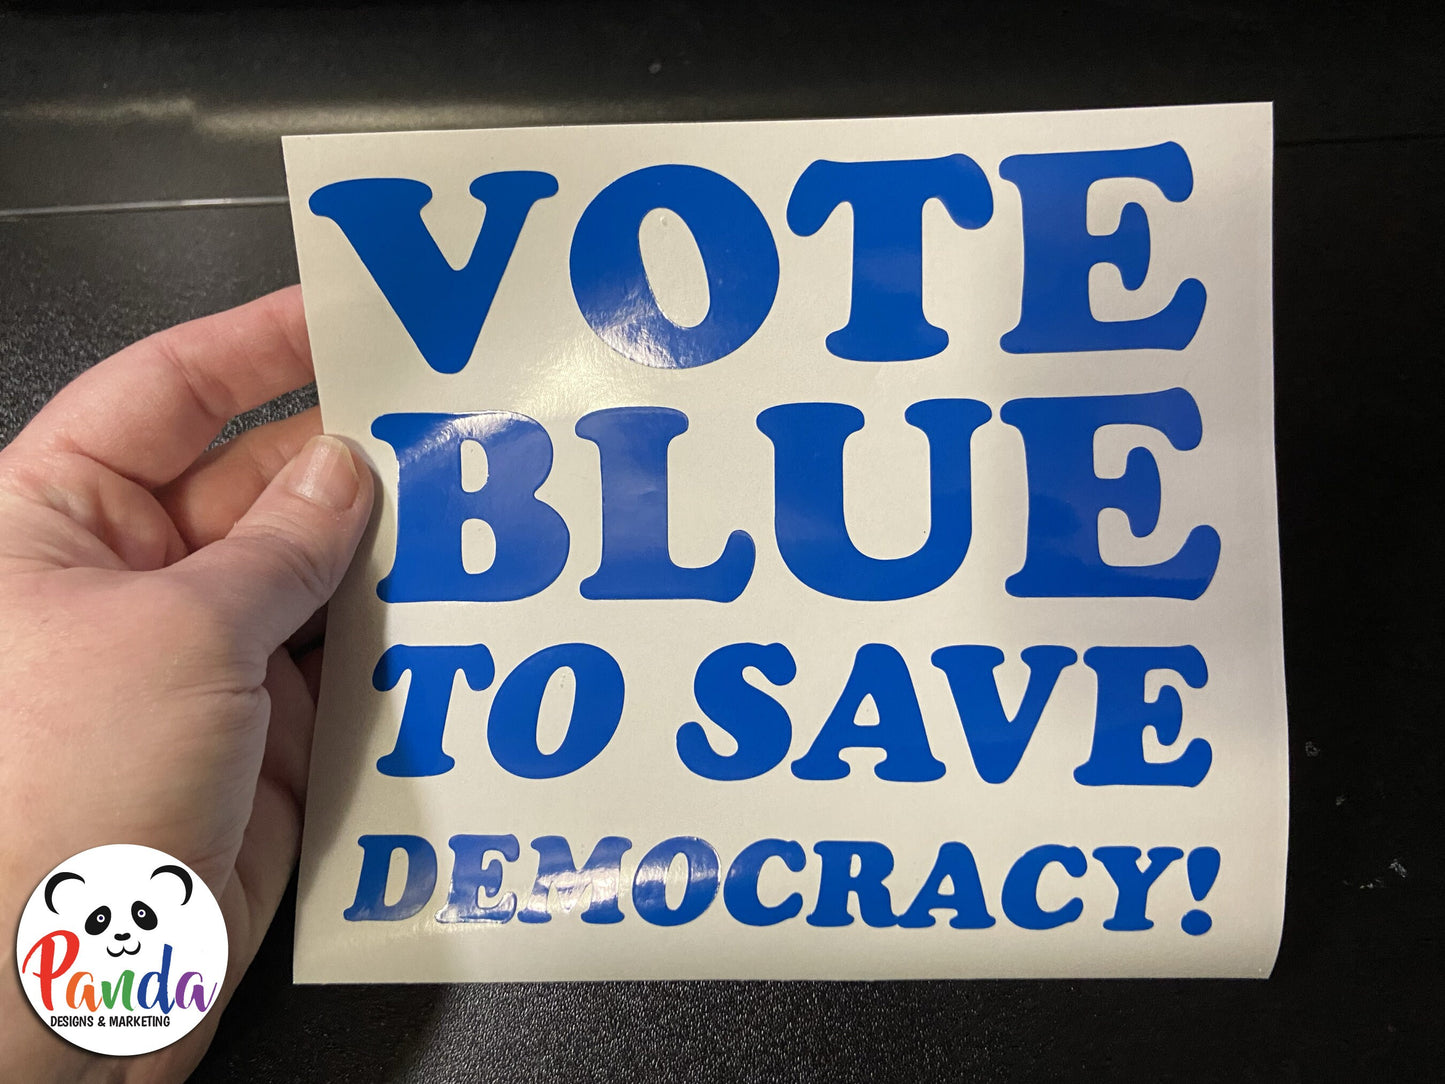 Vote Blue to Save Democracy Vinyl Decals for Cars, Laptops, Water bottles, hydro flasks and more. Multiple die cut size options and designs.